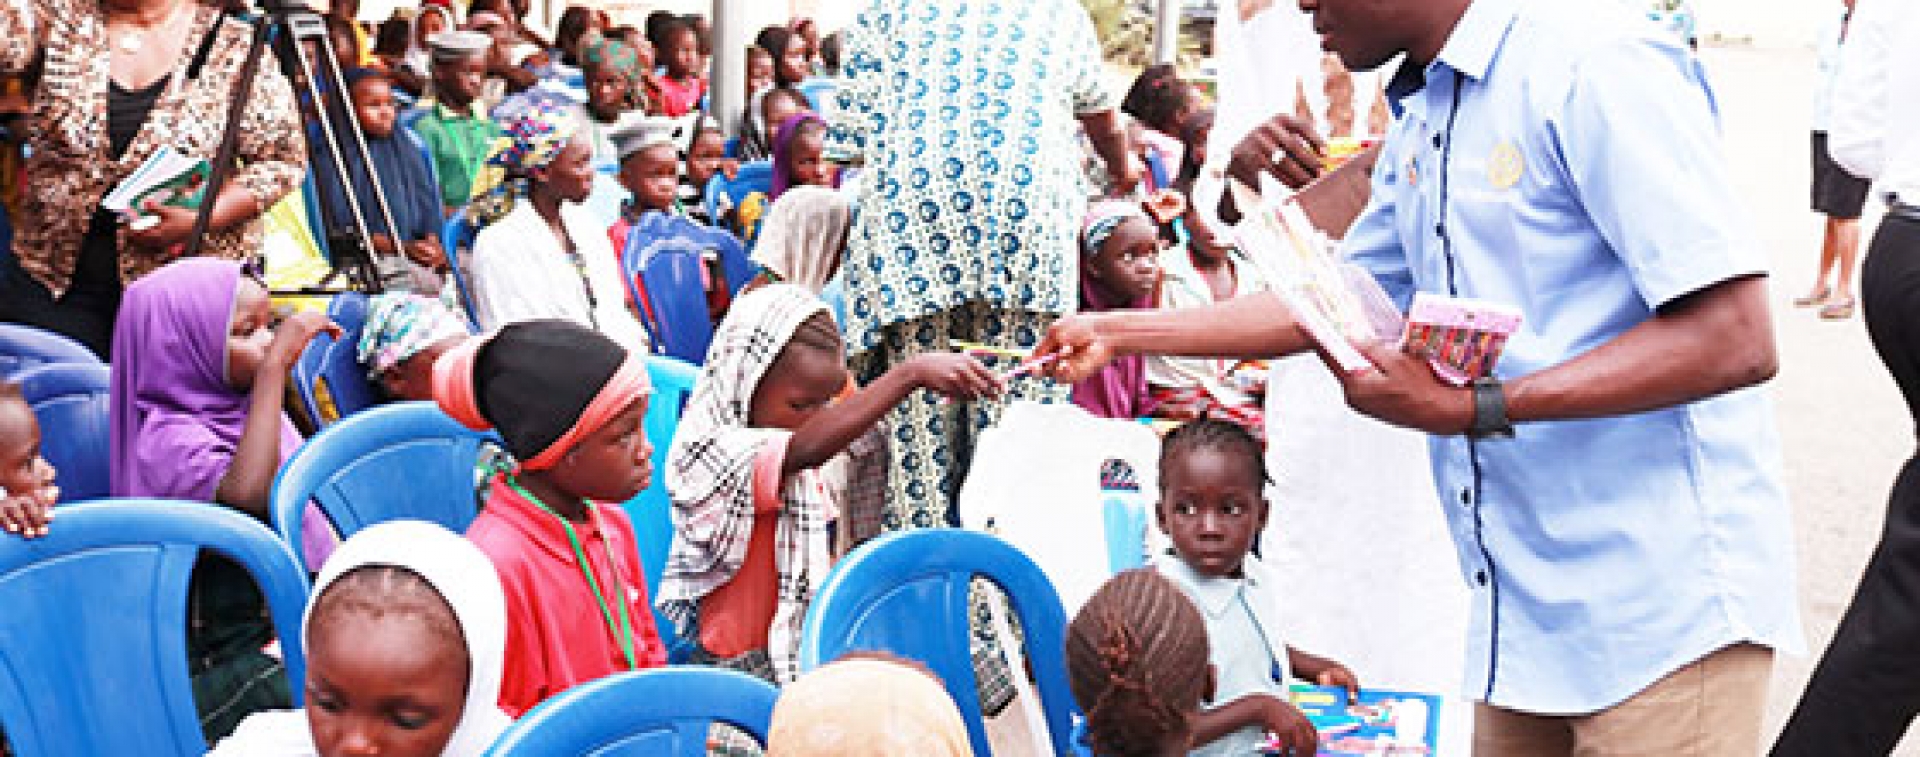 Rotary Club of AUN Marks Humanitarian Day with Feed & Read Girls